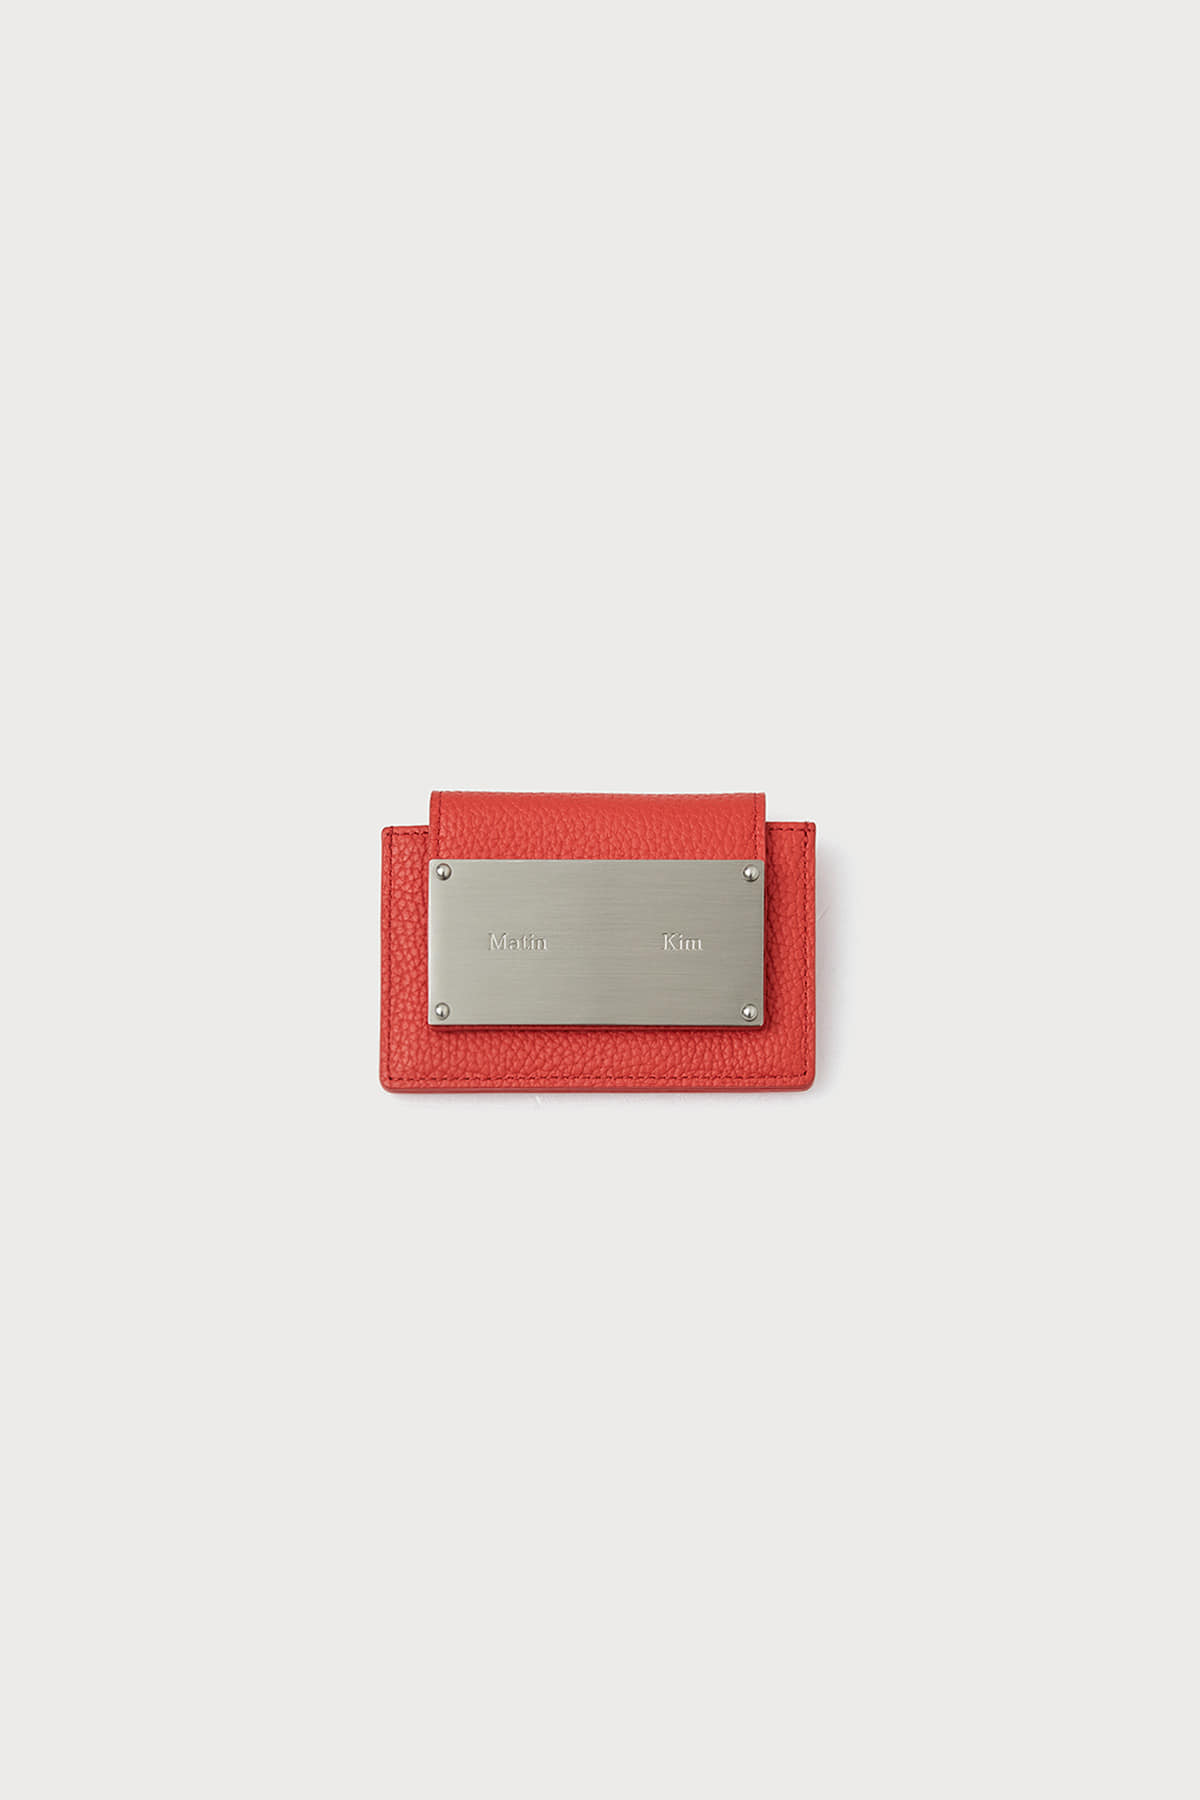 ACCORDION WALLET IN RED